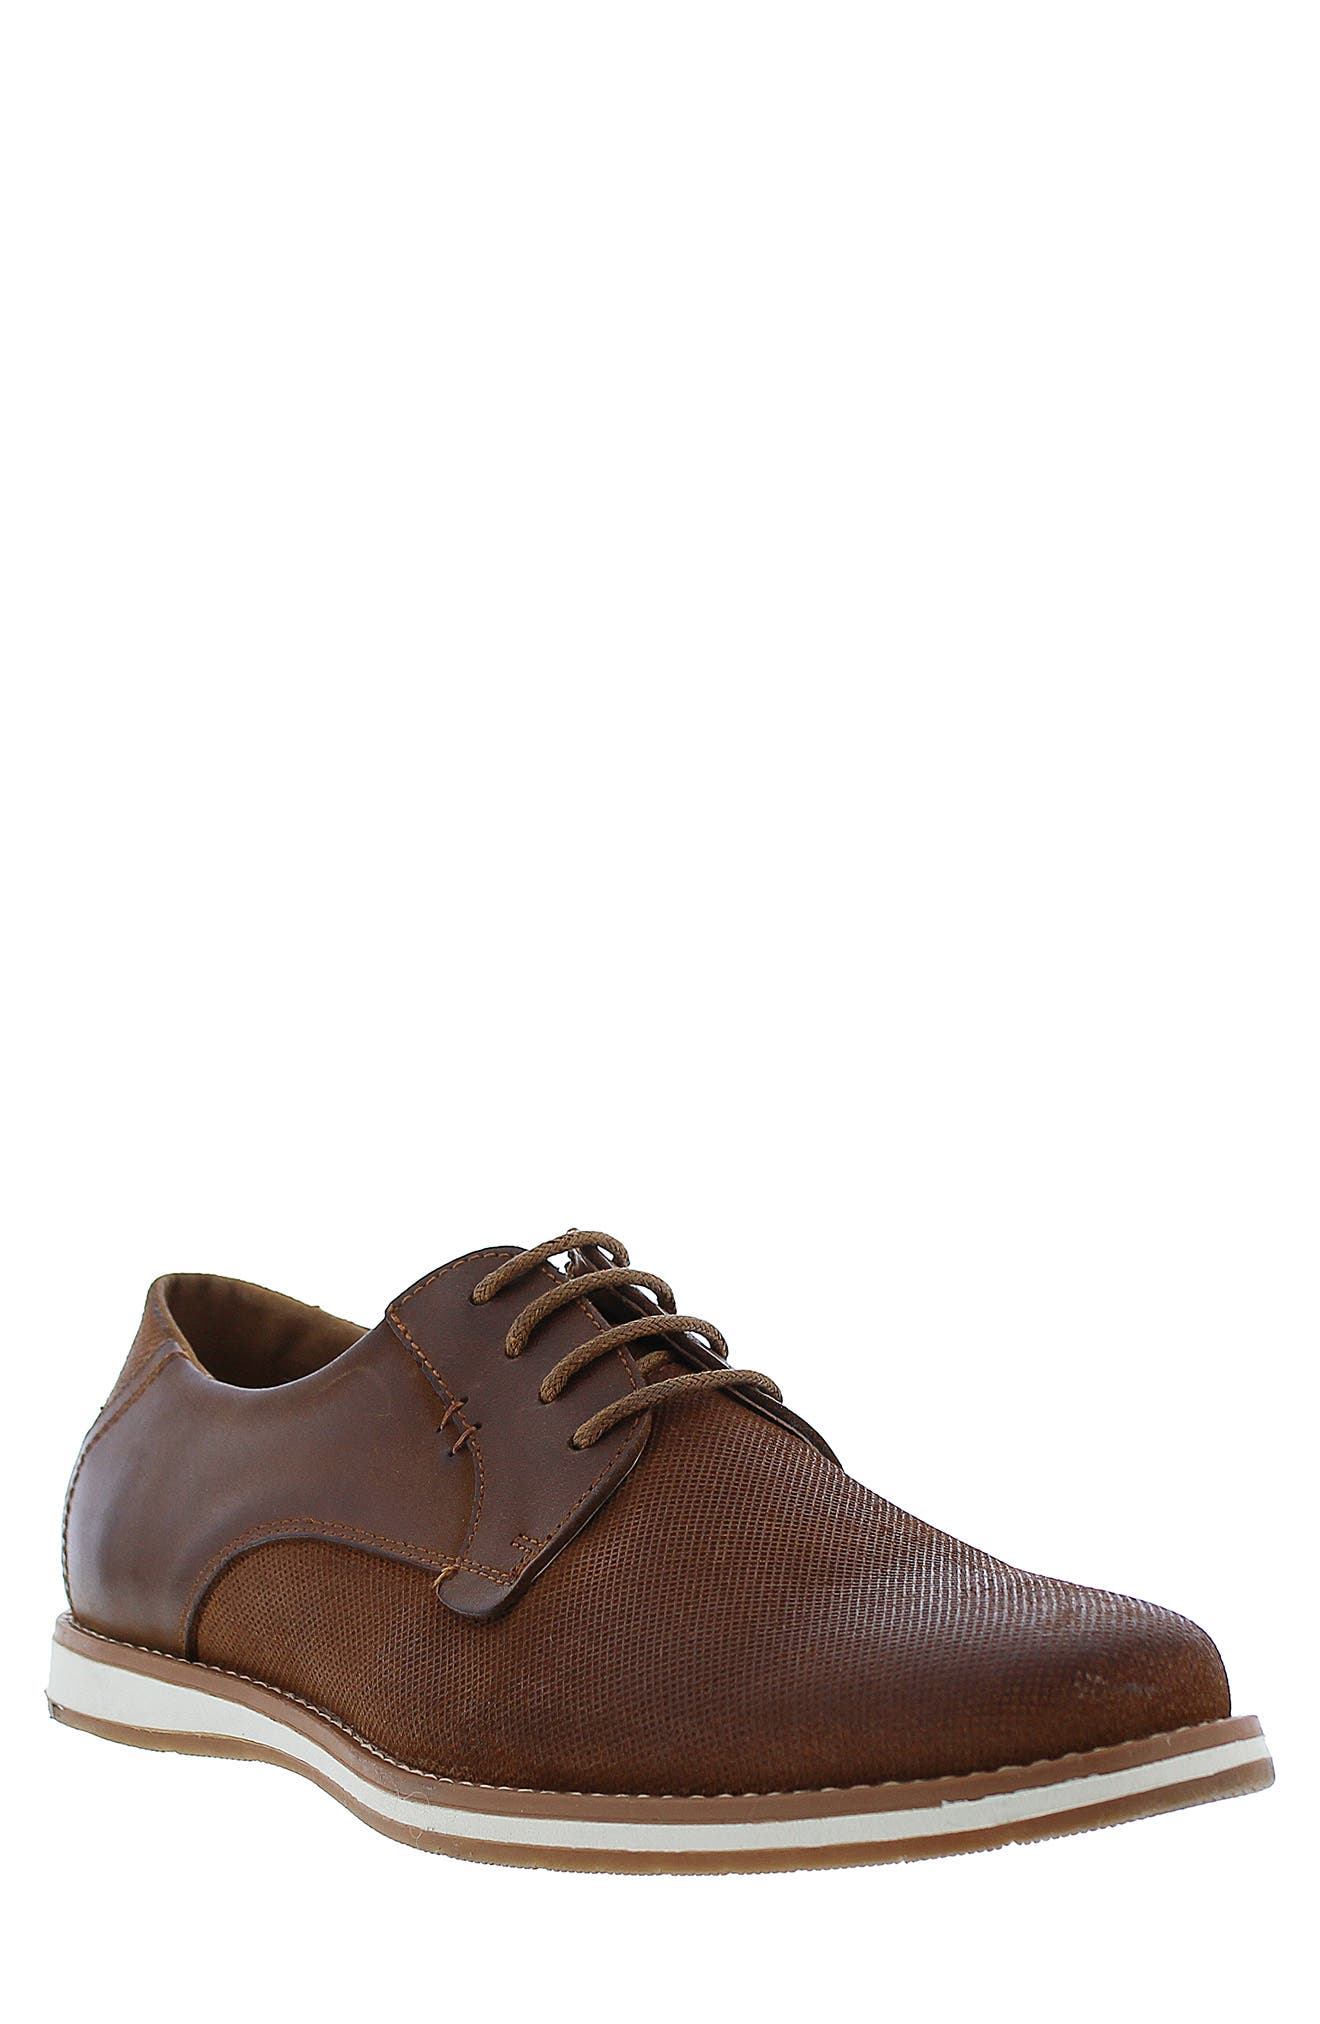 SALE Mens Benjamin Suede Leather Lace Up Shoes By Ikon Retail Price £25.00